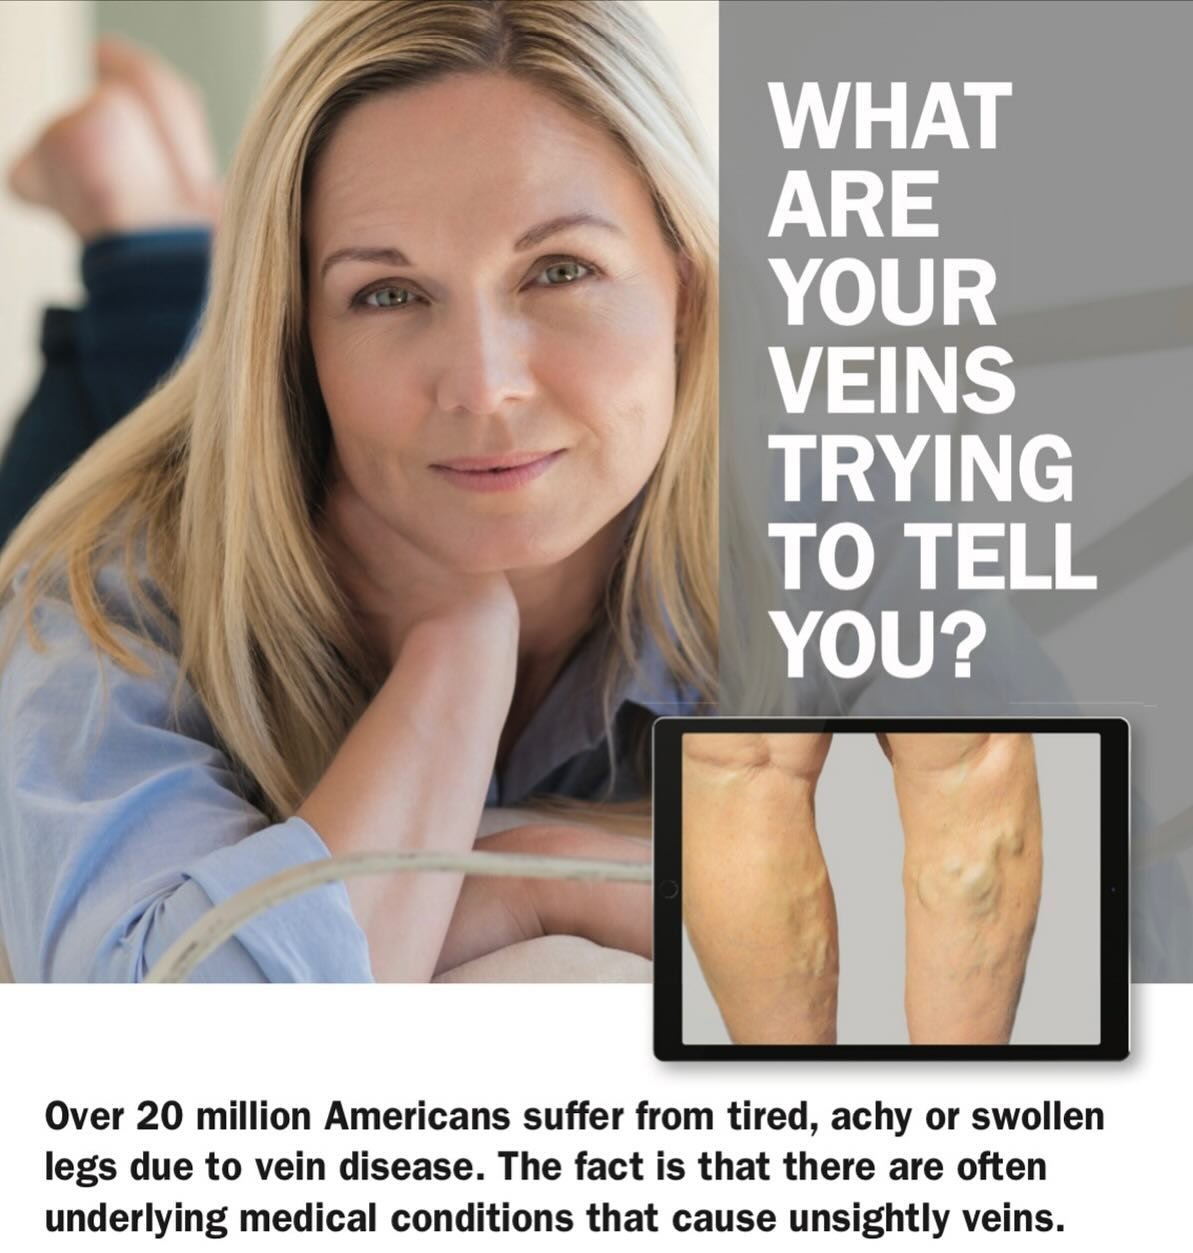 The Vein Institute provides comprehensive consultations, the safest and most effective non-surgical treatment options, plus a customized plan to address your total leg health.

In-network with most major insurance providers. Call to receive a complim